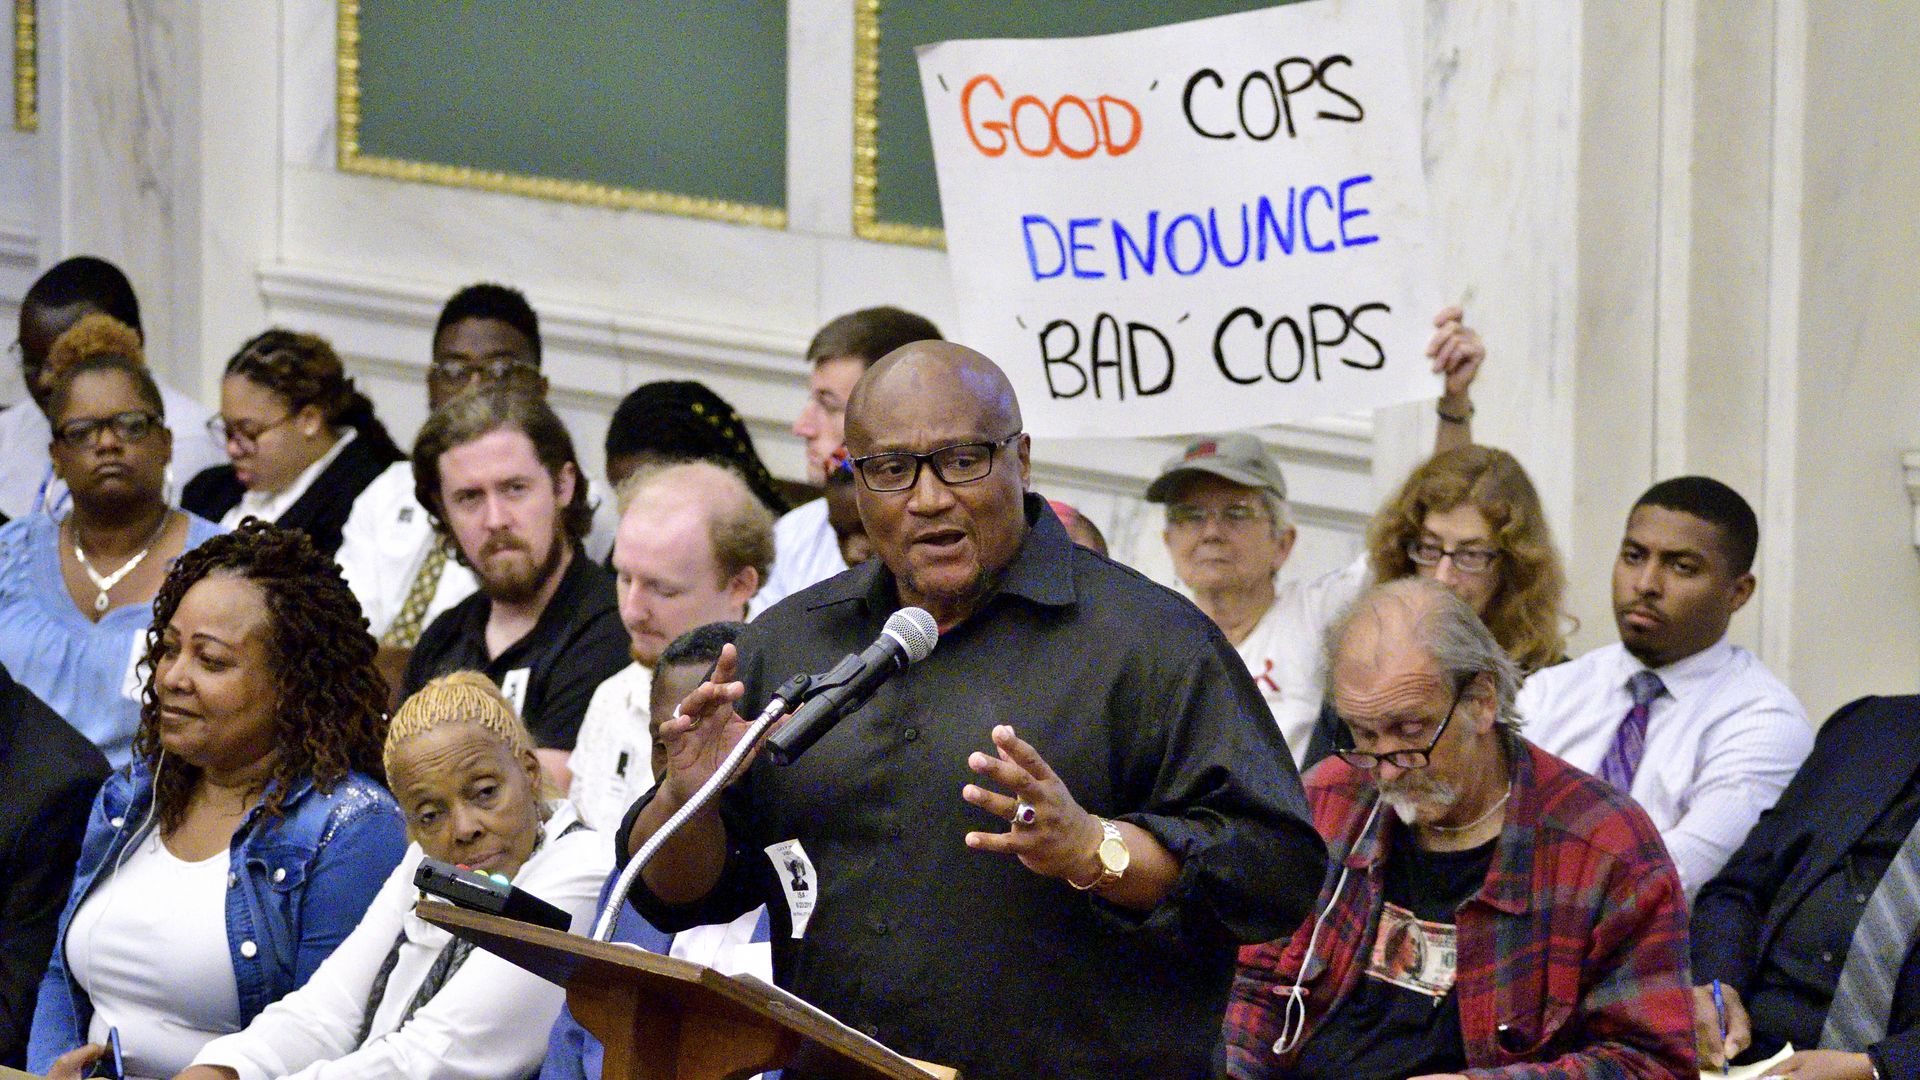 In this image, a man speaks at a podium while a woman holds a sign behind him saying "Good cops denounce bad cops""